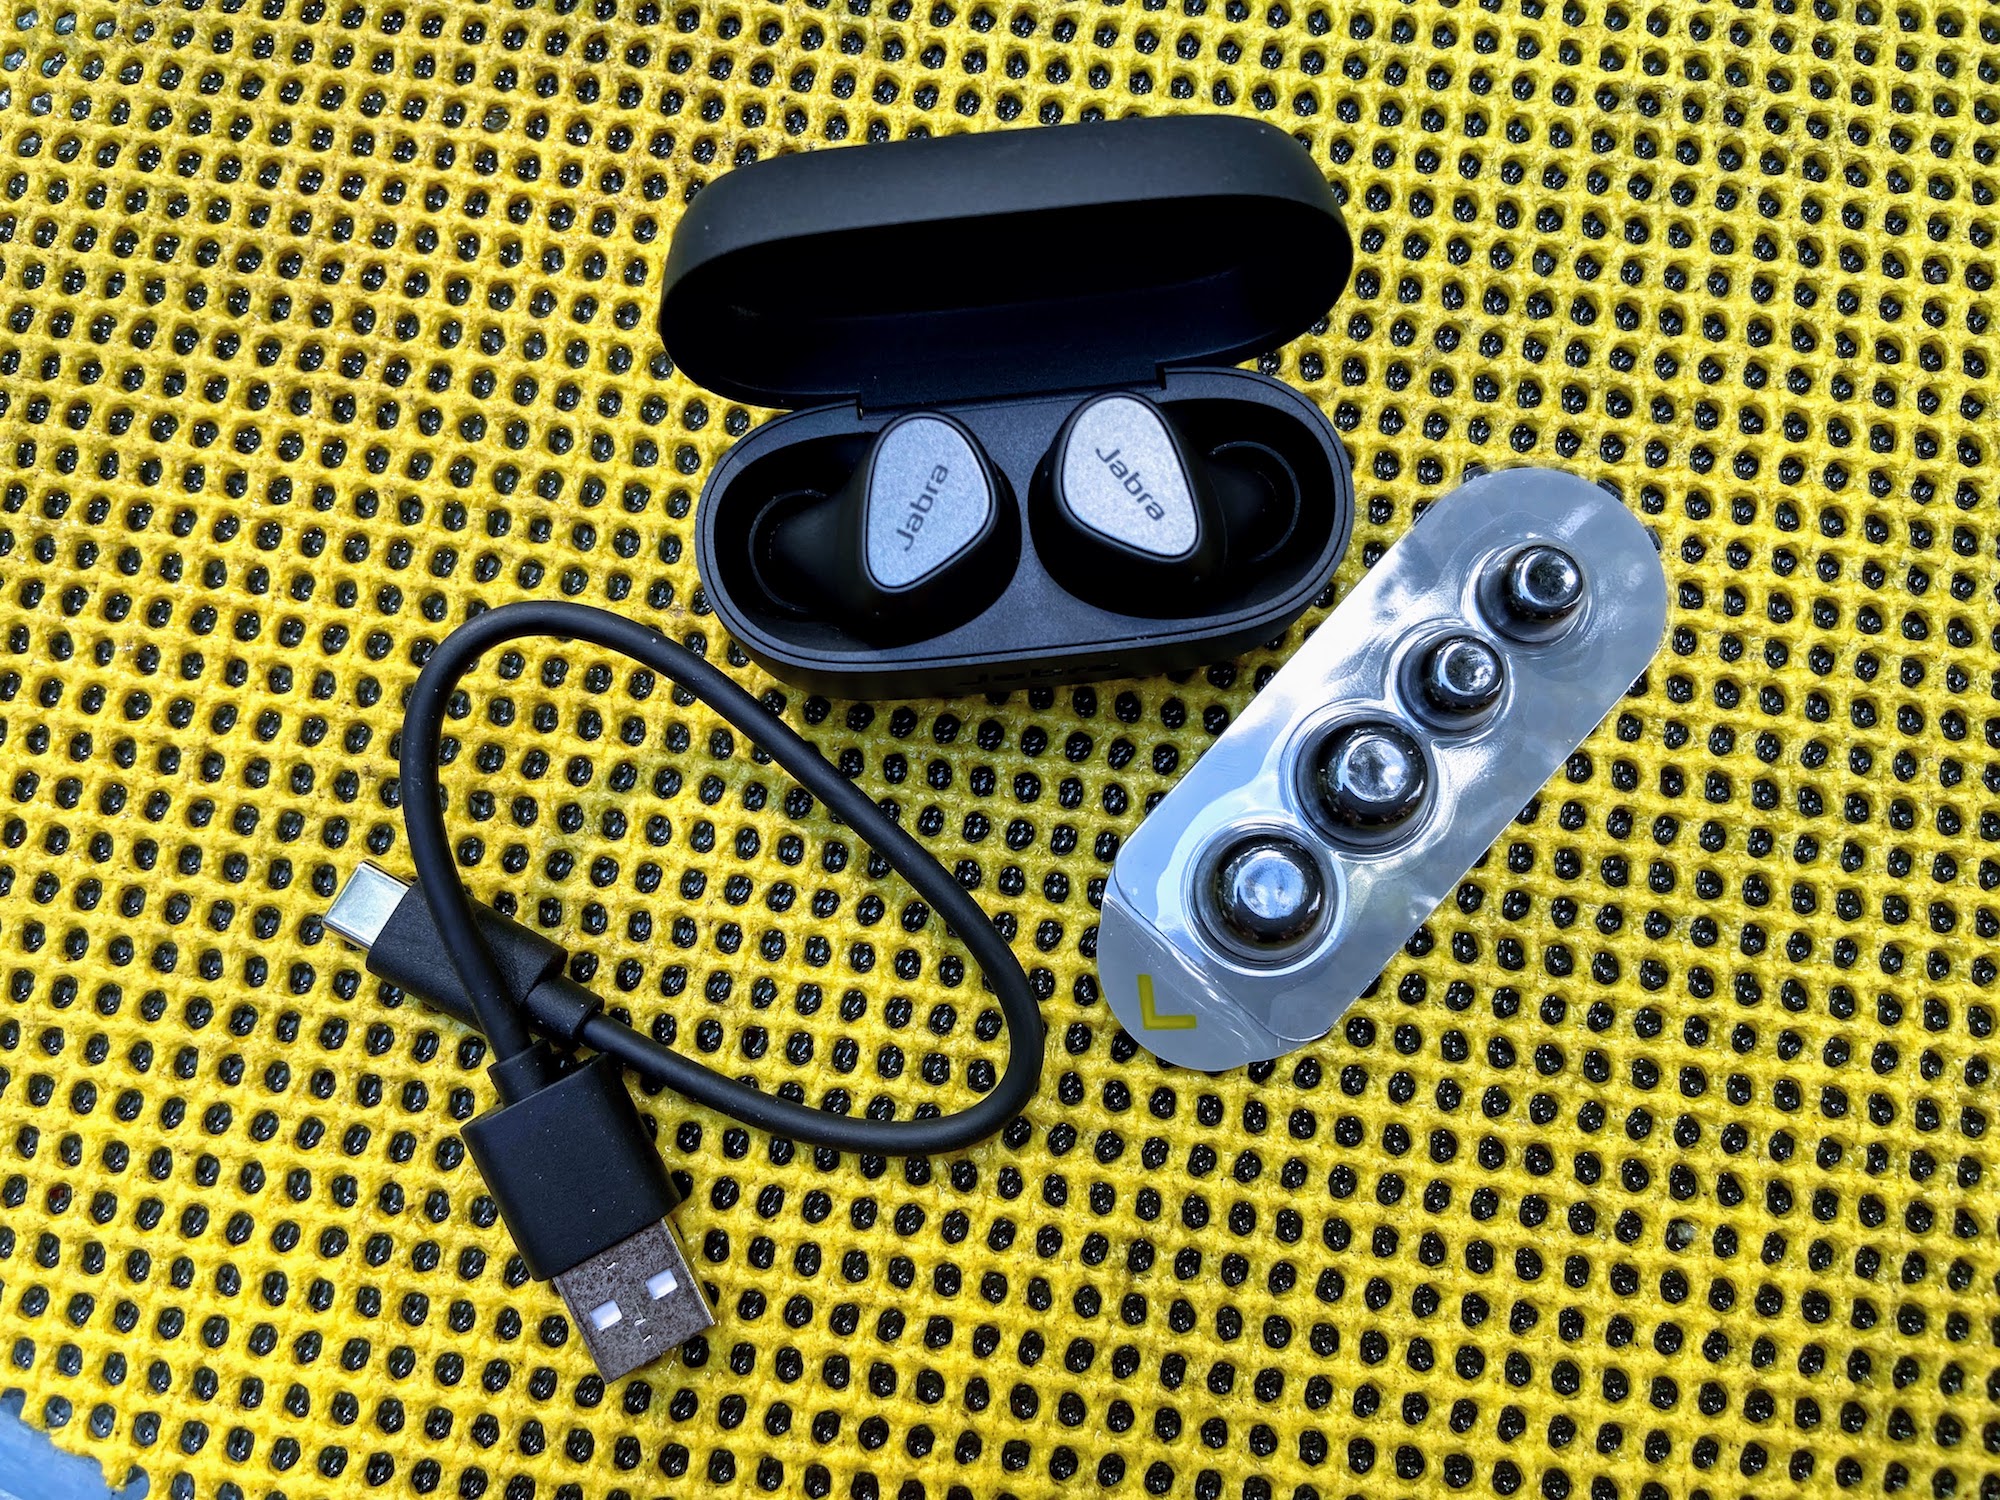 Jabra Elite 3 Review: All Of The Basics On A Budget